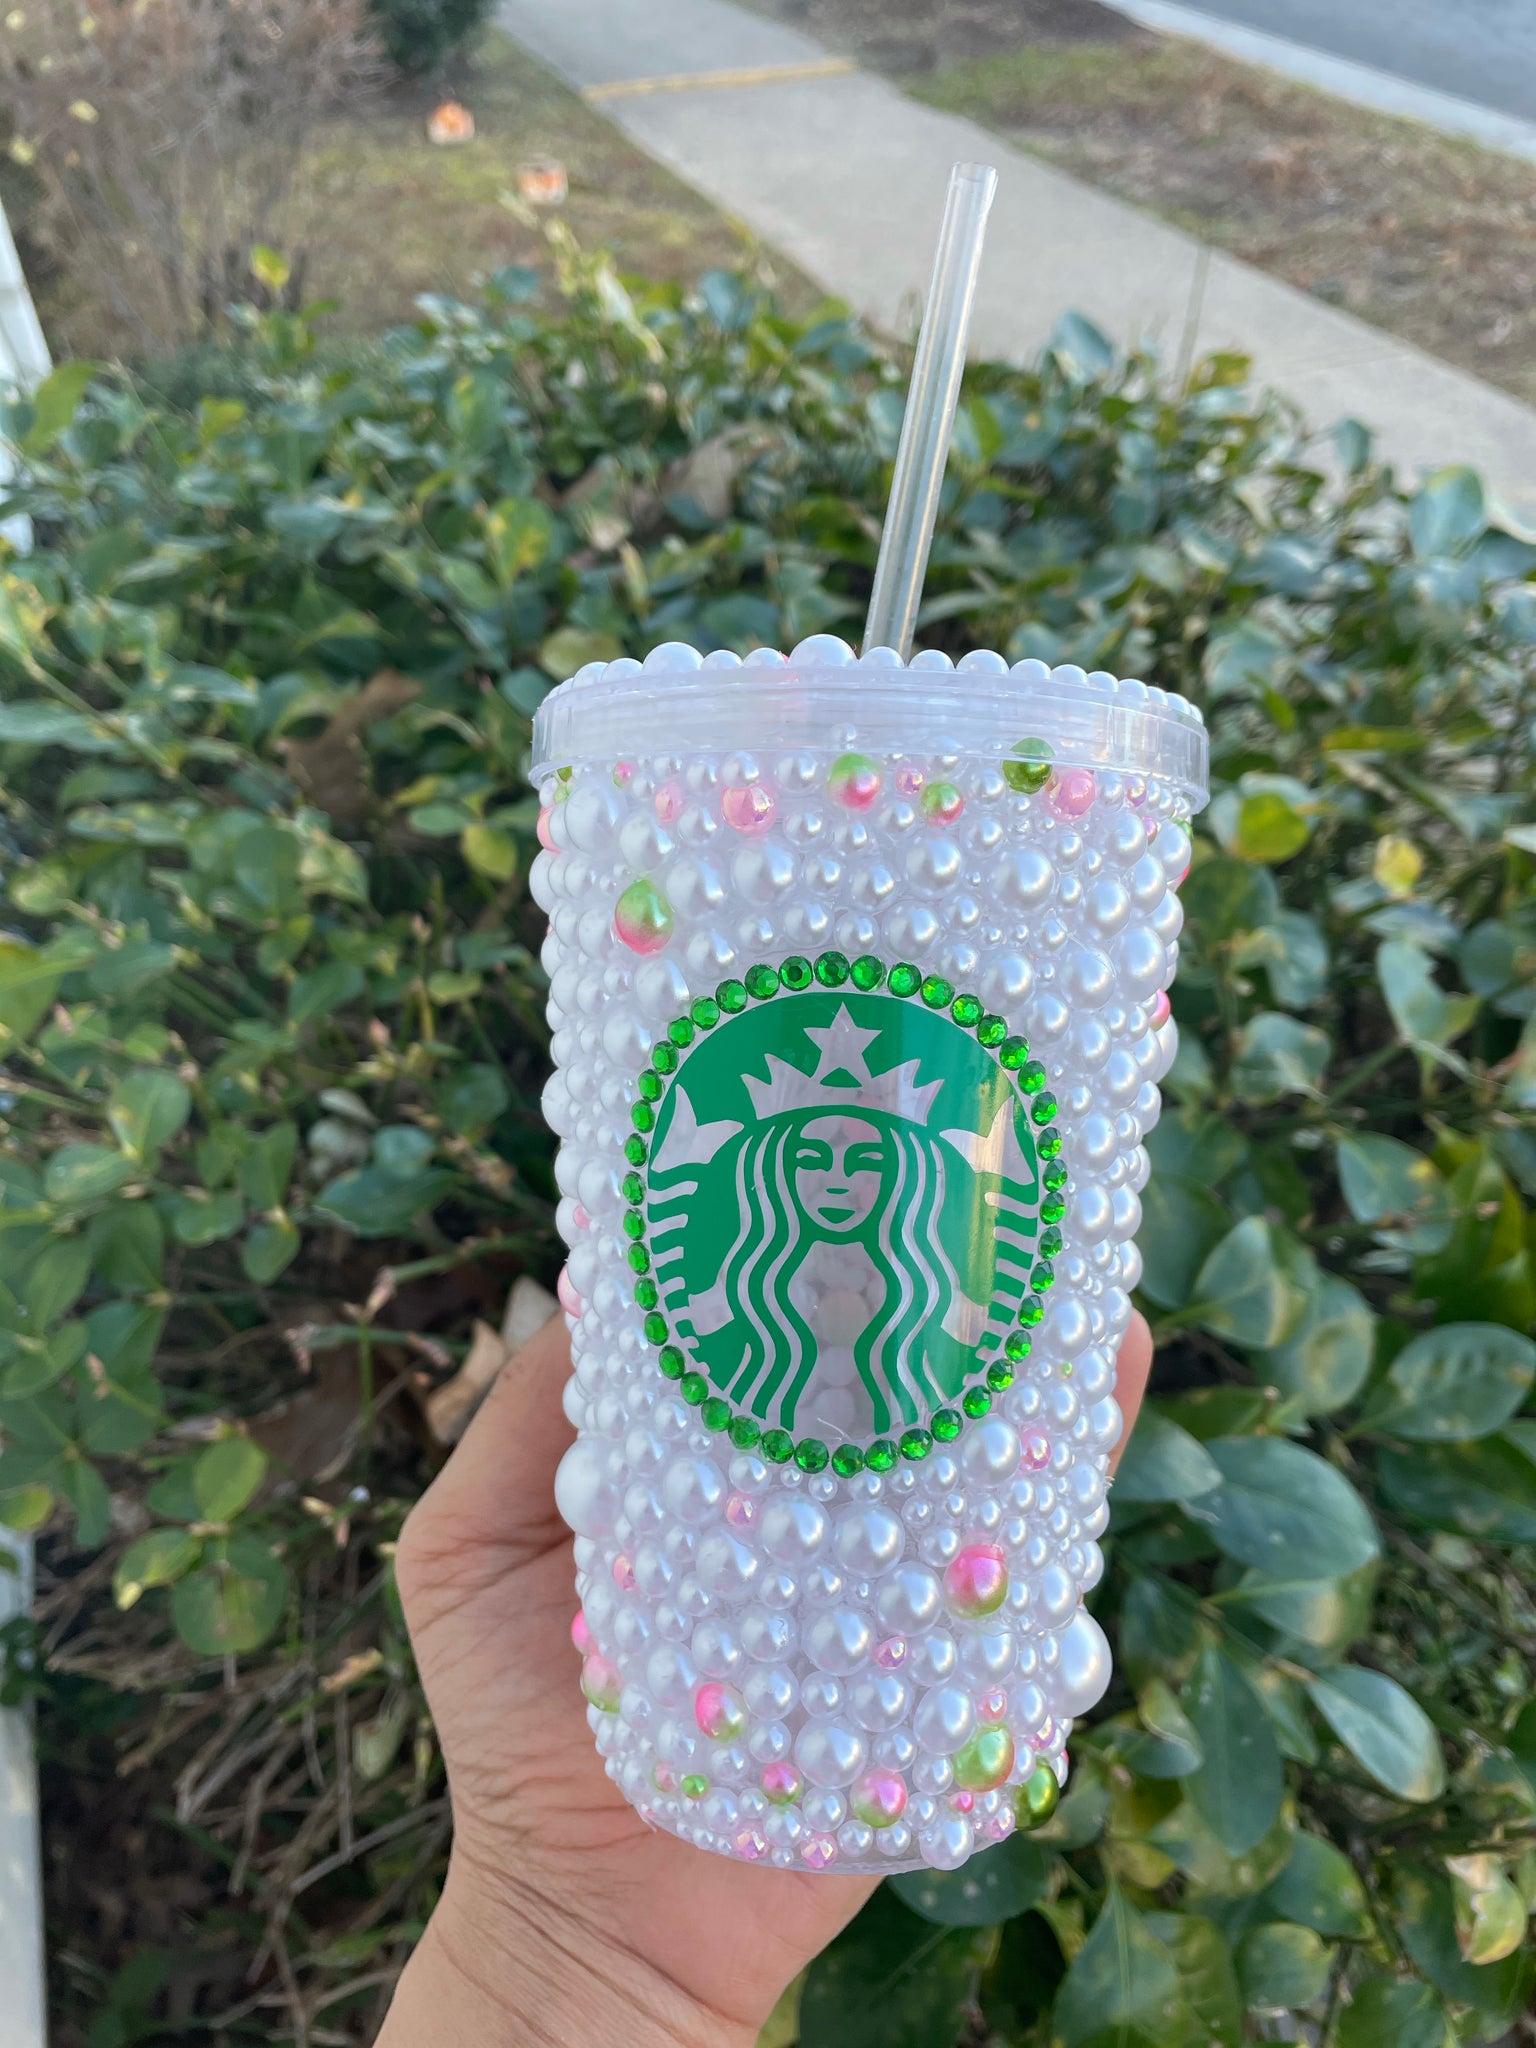 Pretty, Pearlized Starbucks Tumblers Celebrate the Best Parts of